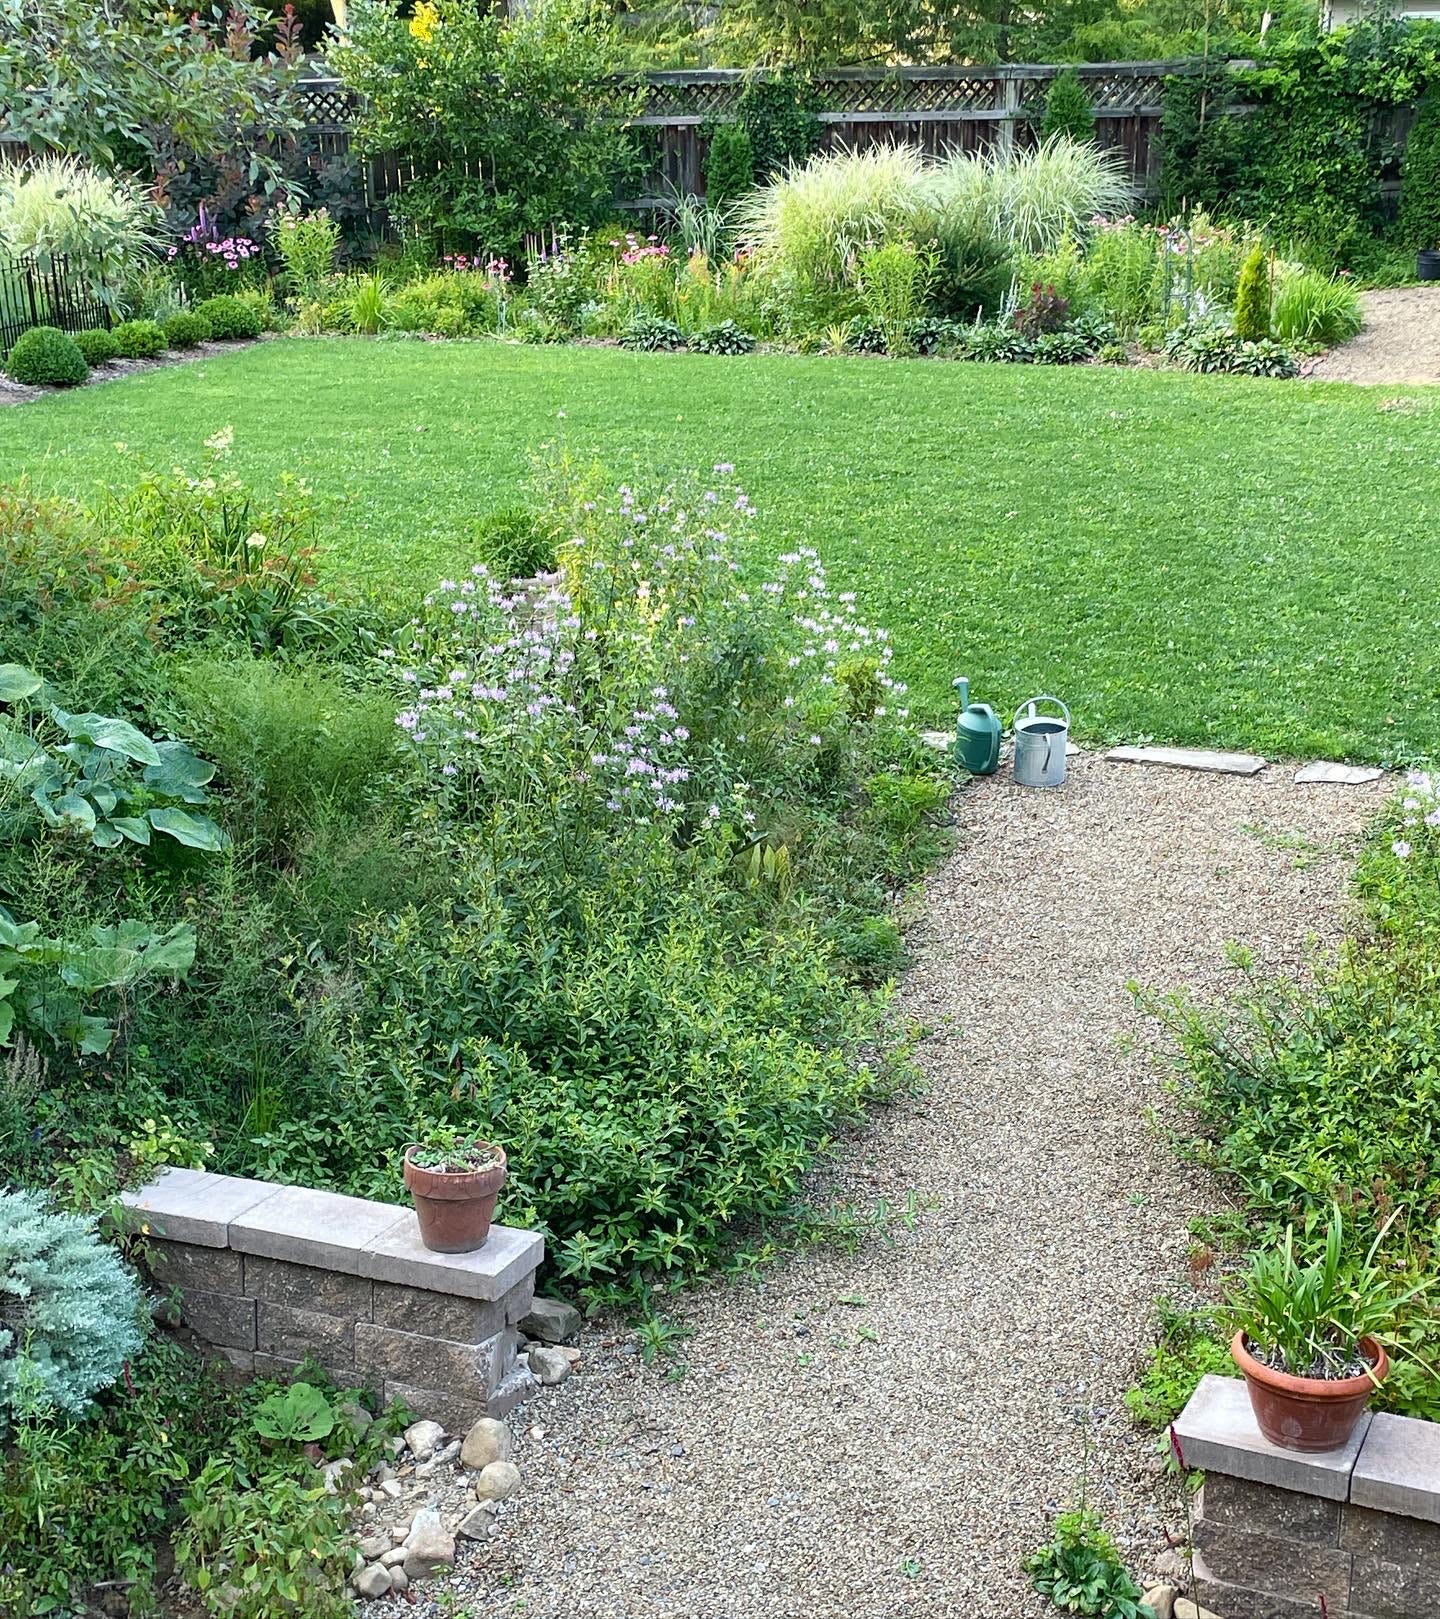 Here is a view taken last summer looking from the Ruin garden, across the lawn that replaced the driveway, and to half of the Long Border planting that is in front of the same privacy fence. 